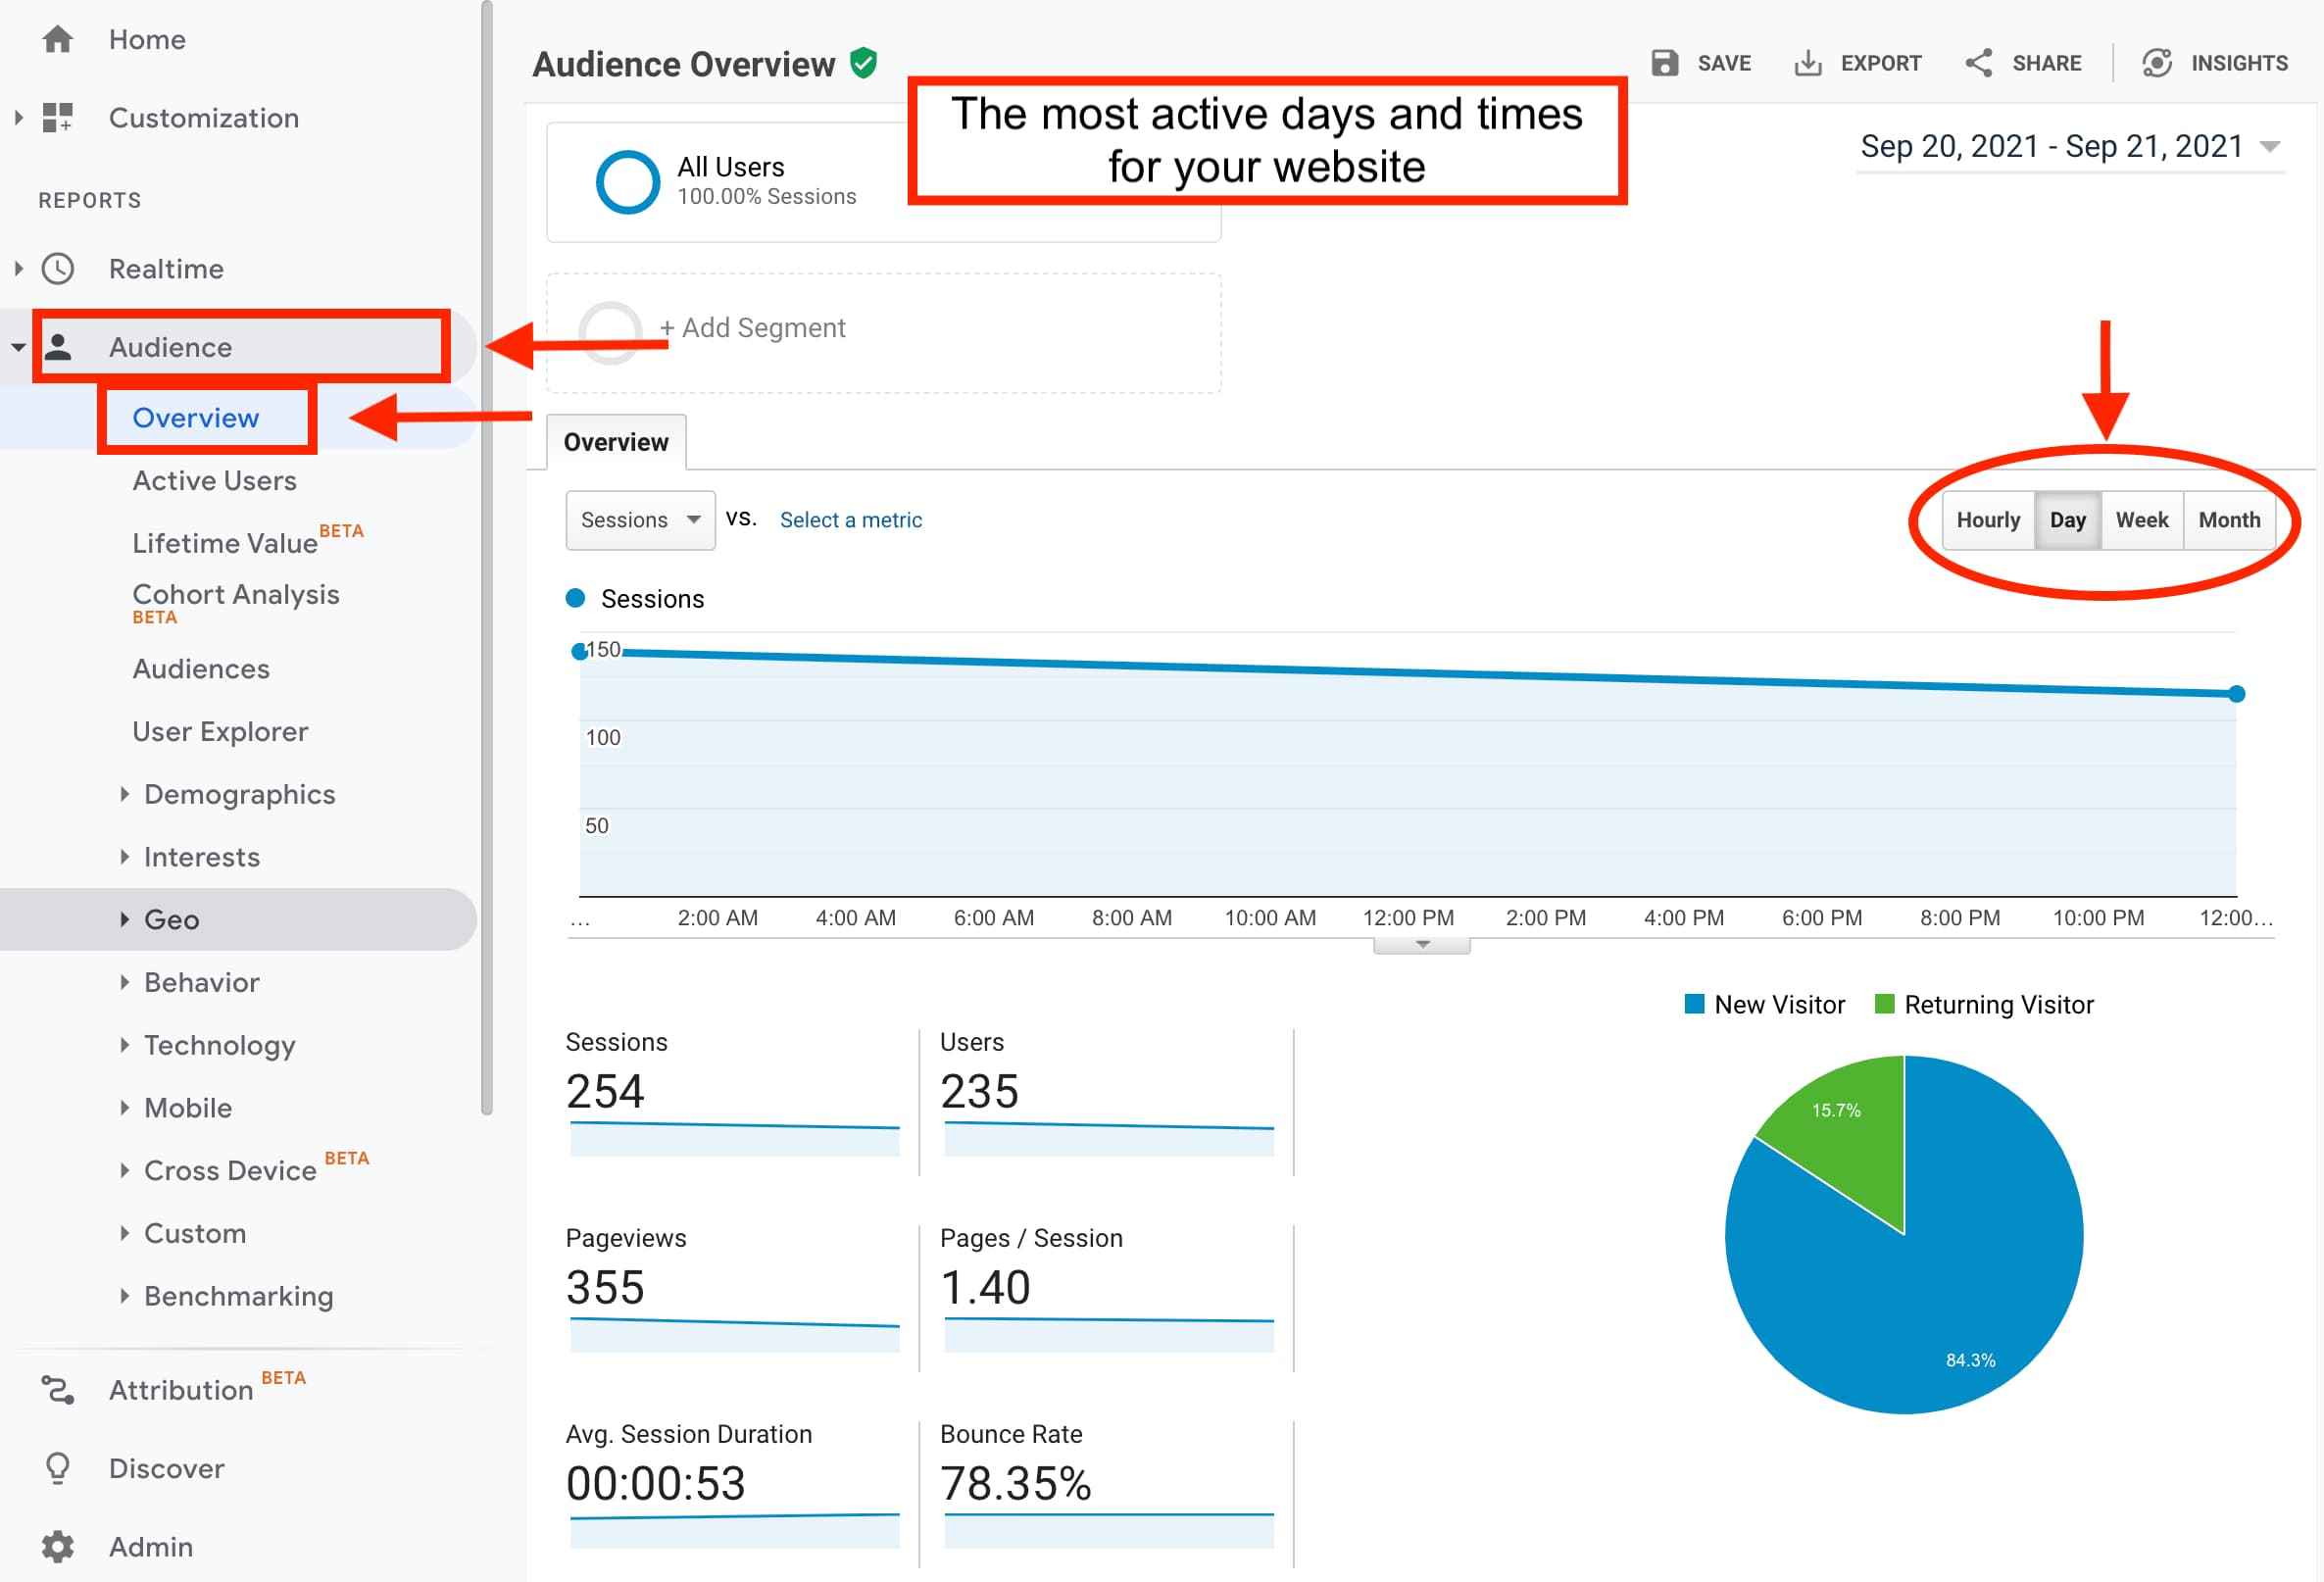 Where to find the most active days and times for your website in Google Analytics